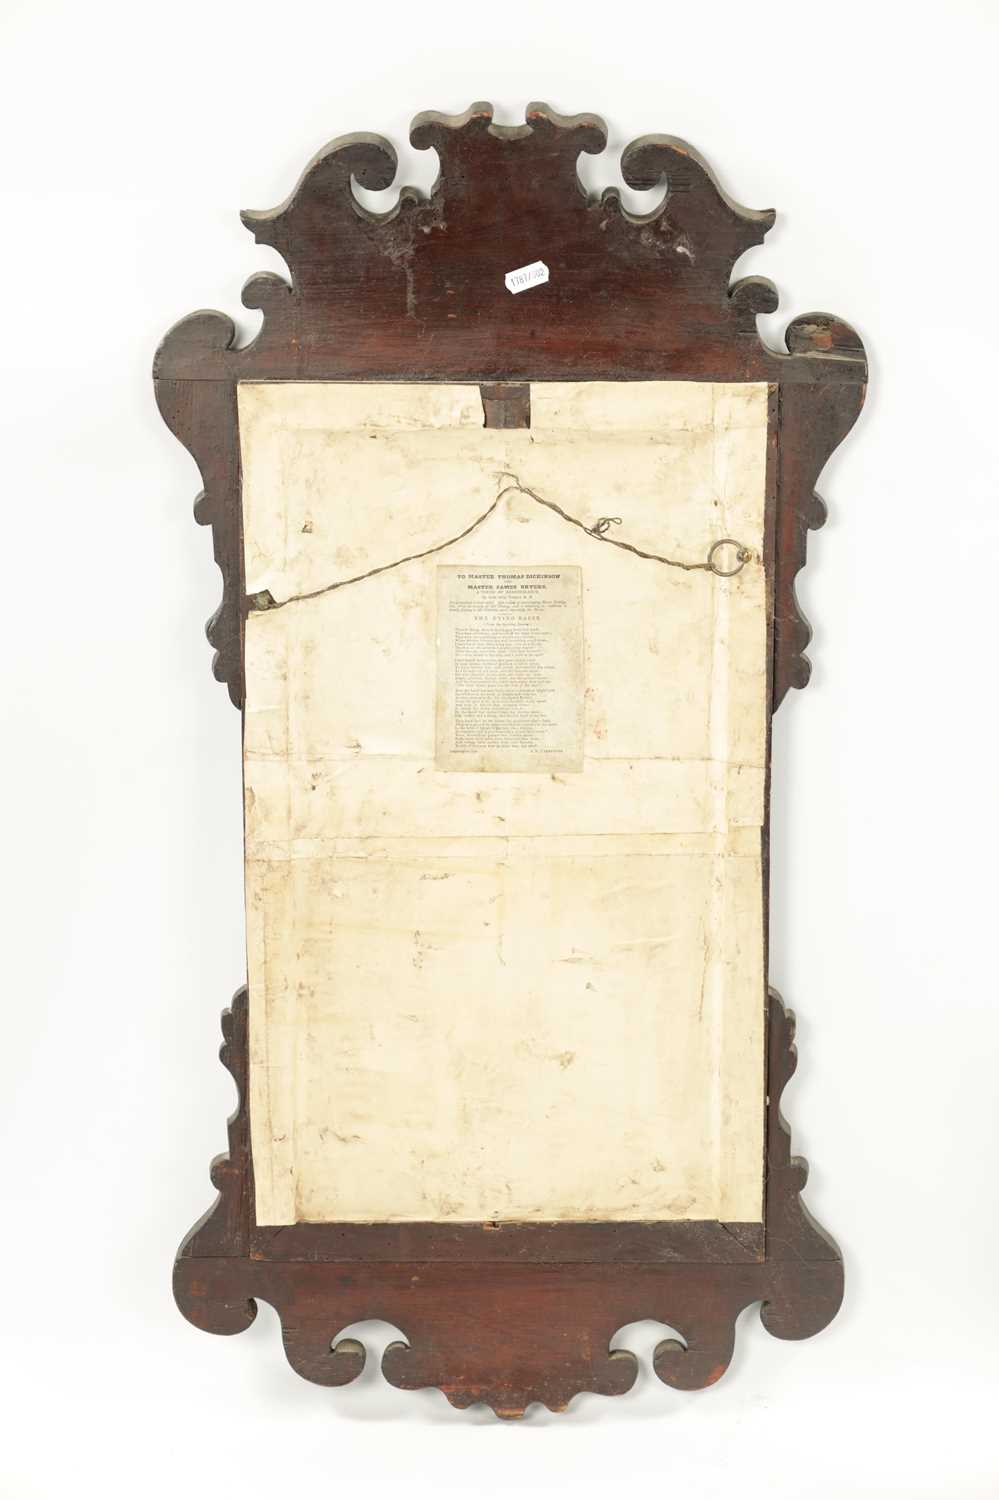 A SMALL 18TH CENTURY WALNUT HANGING MIRROR - Image 6 of 6